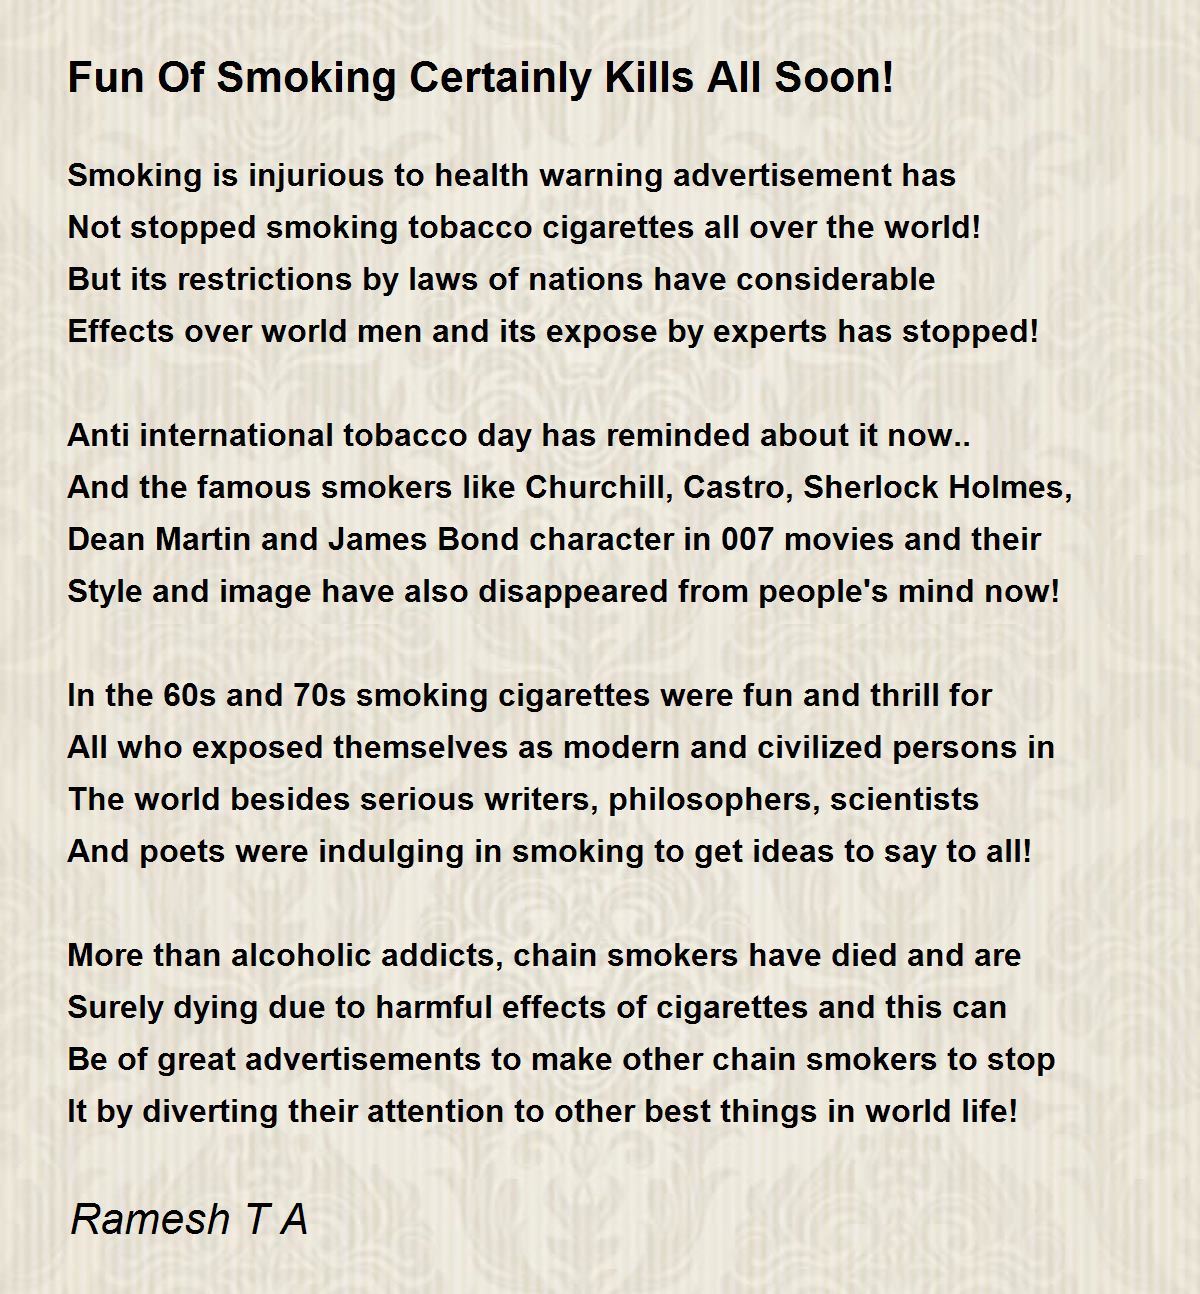 Fun Of Smoking Certainly Kills All Soon! - Fun Of Smoking Certainly Kills  All Soon! Poem by Ramesh T A